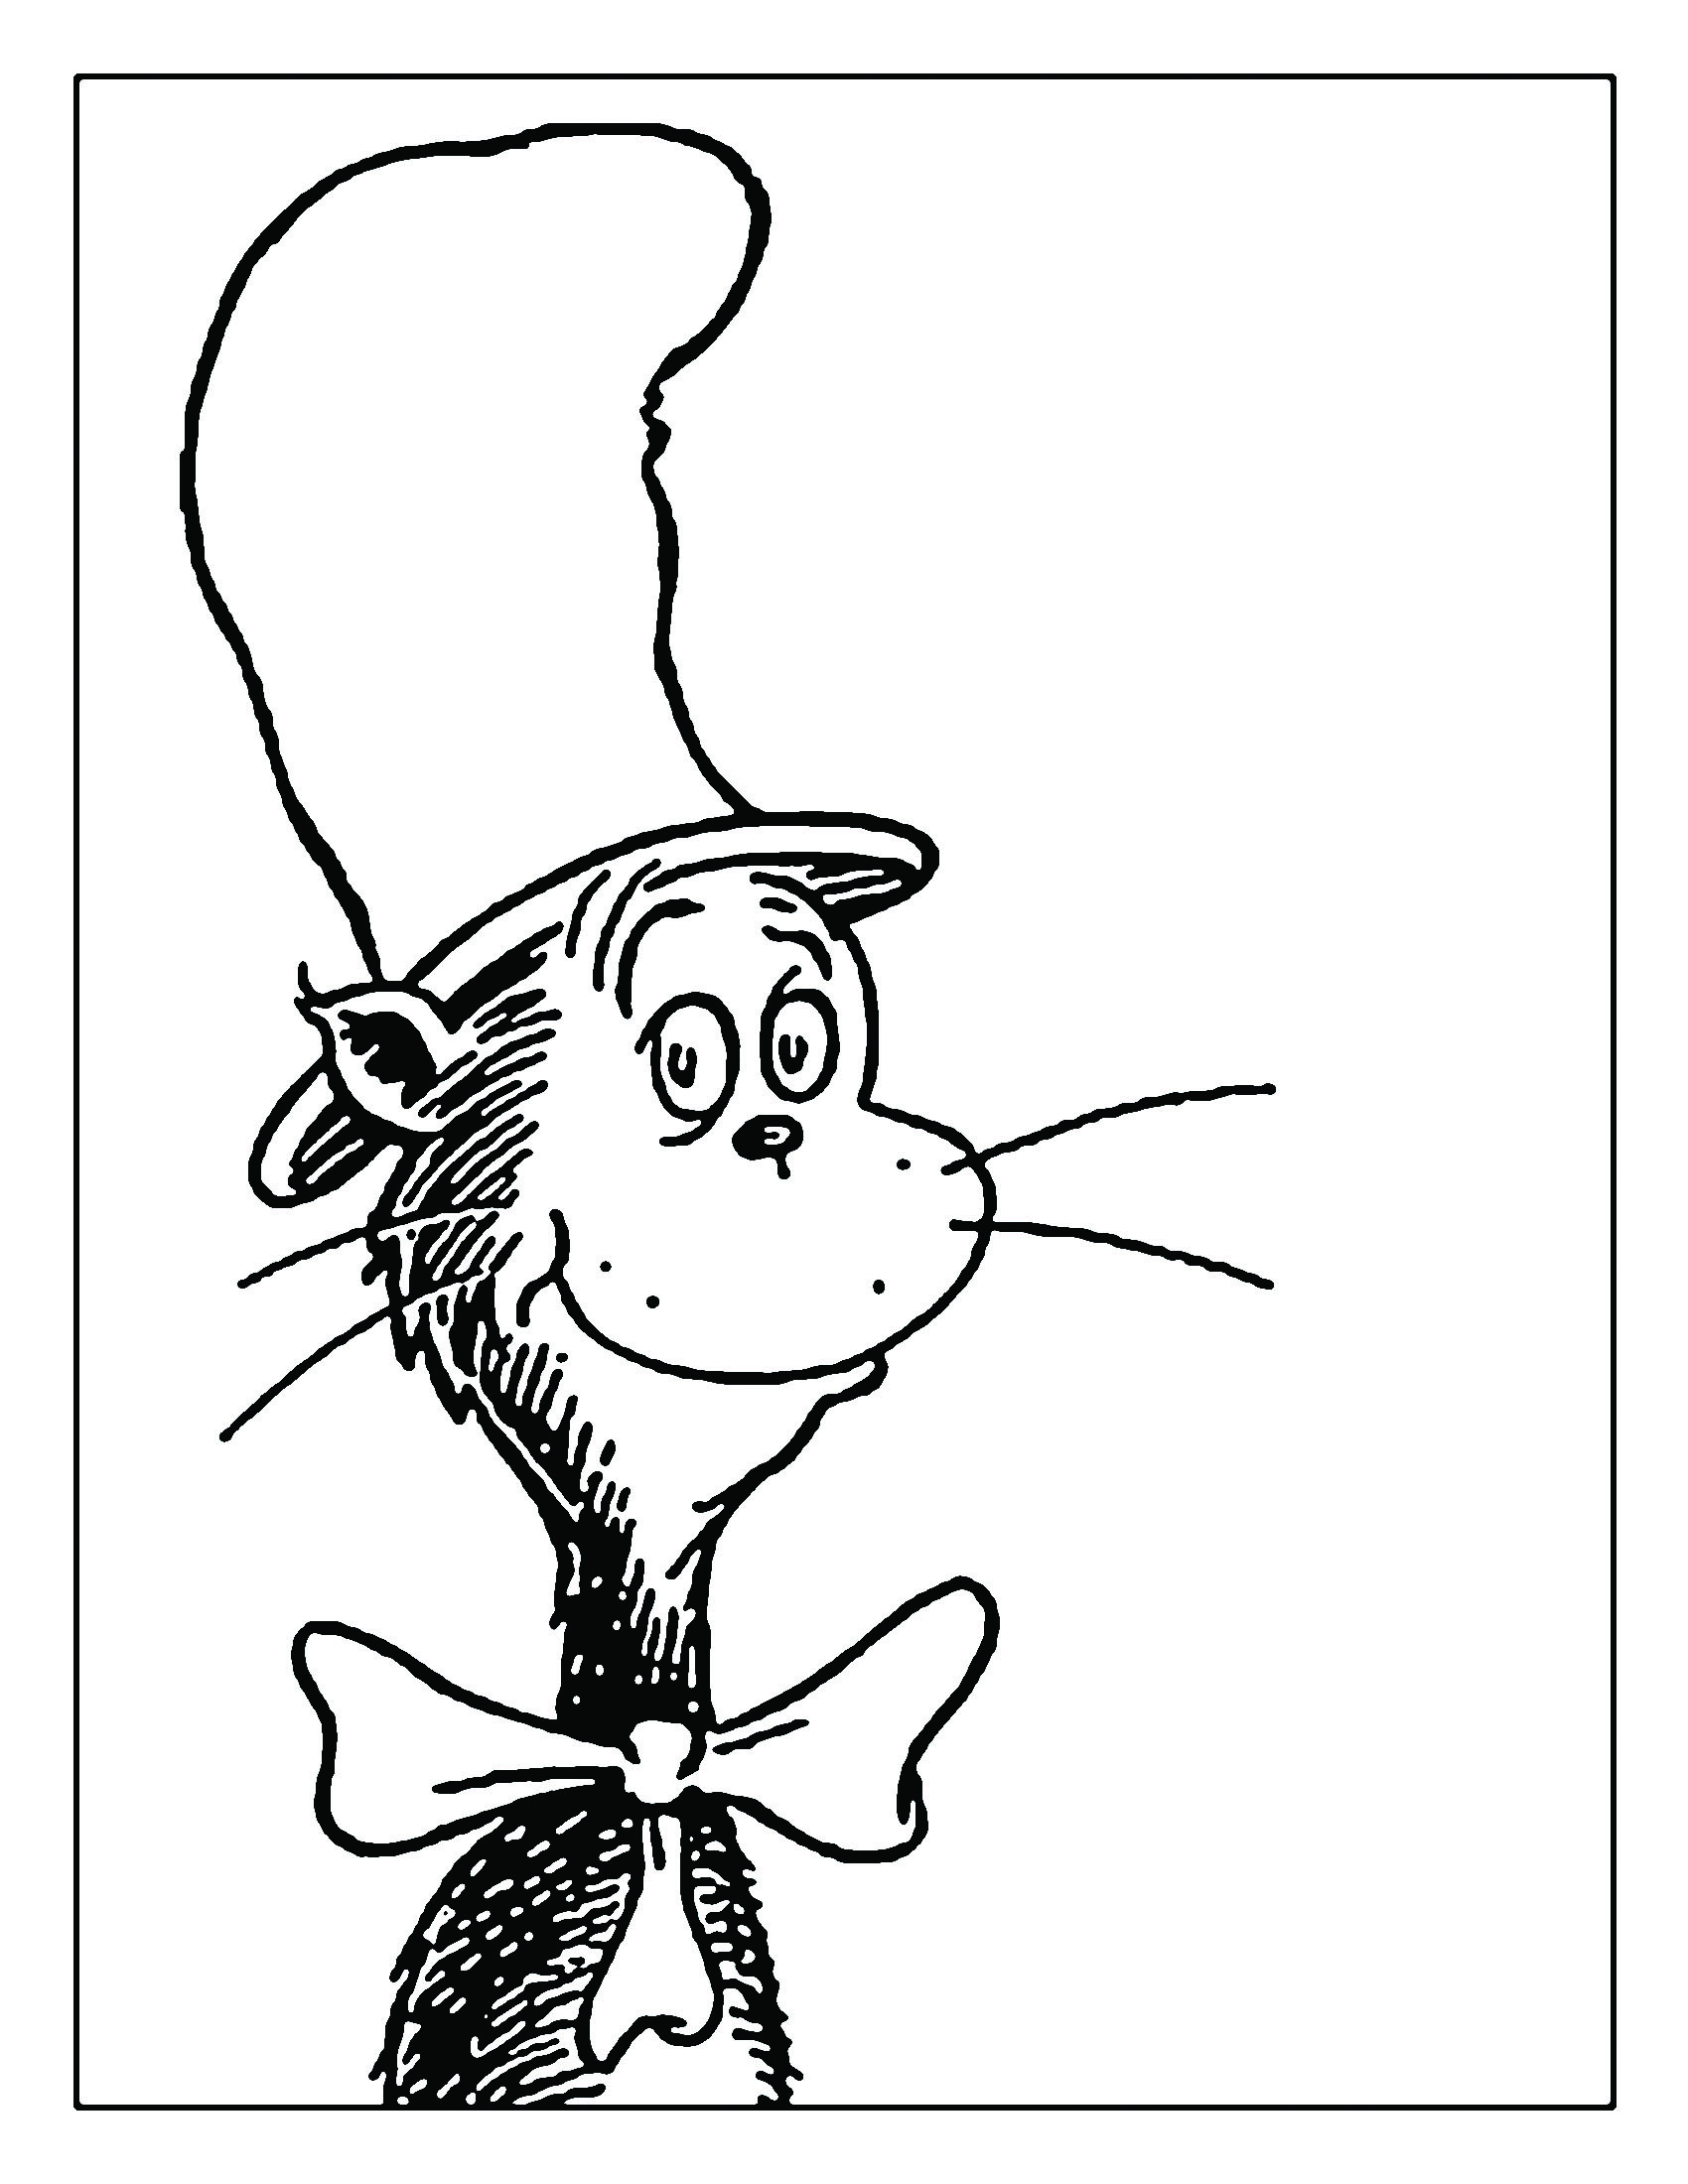 Cat In The Hat Coloring Pages | SelfColoringPages.com